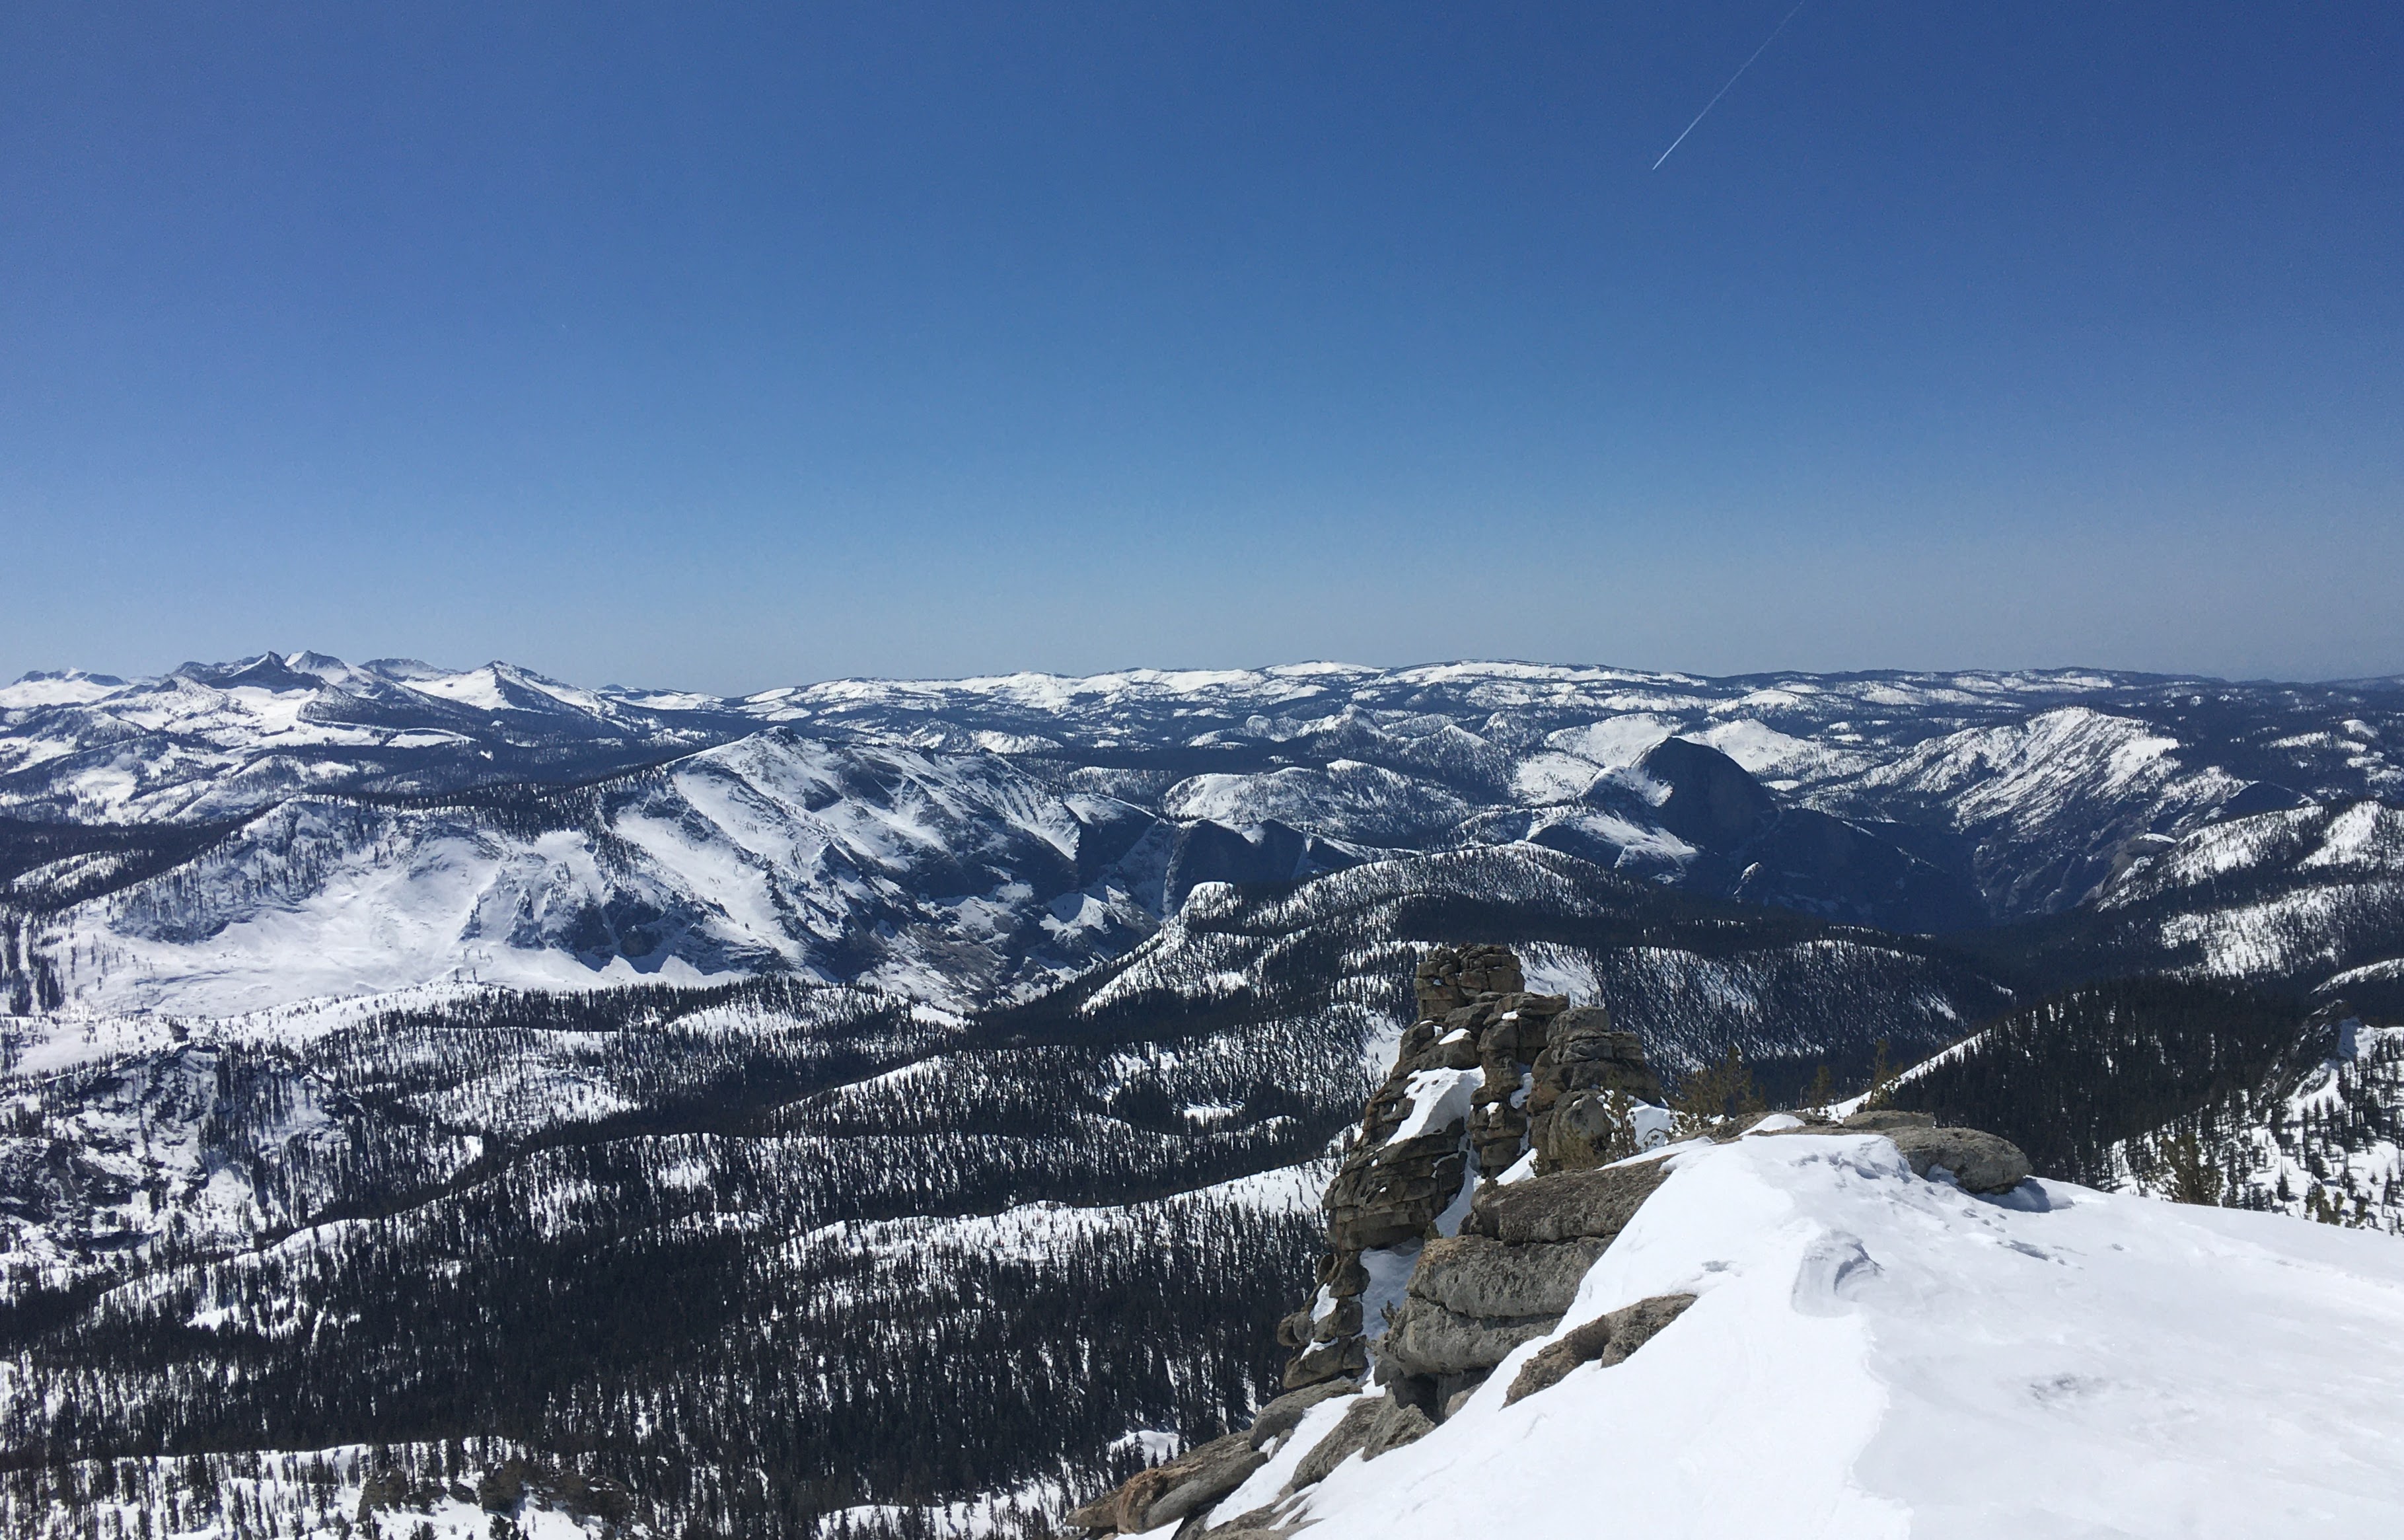 View from high peak to the south of Yosemite; forested snowy landscape off into the distance